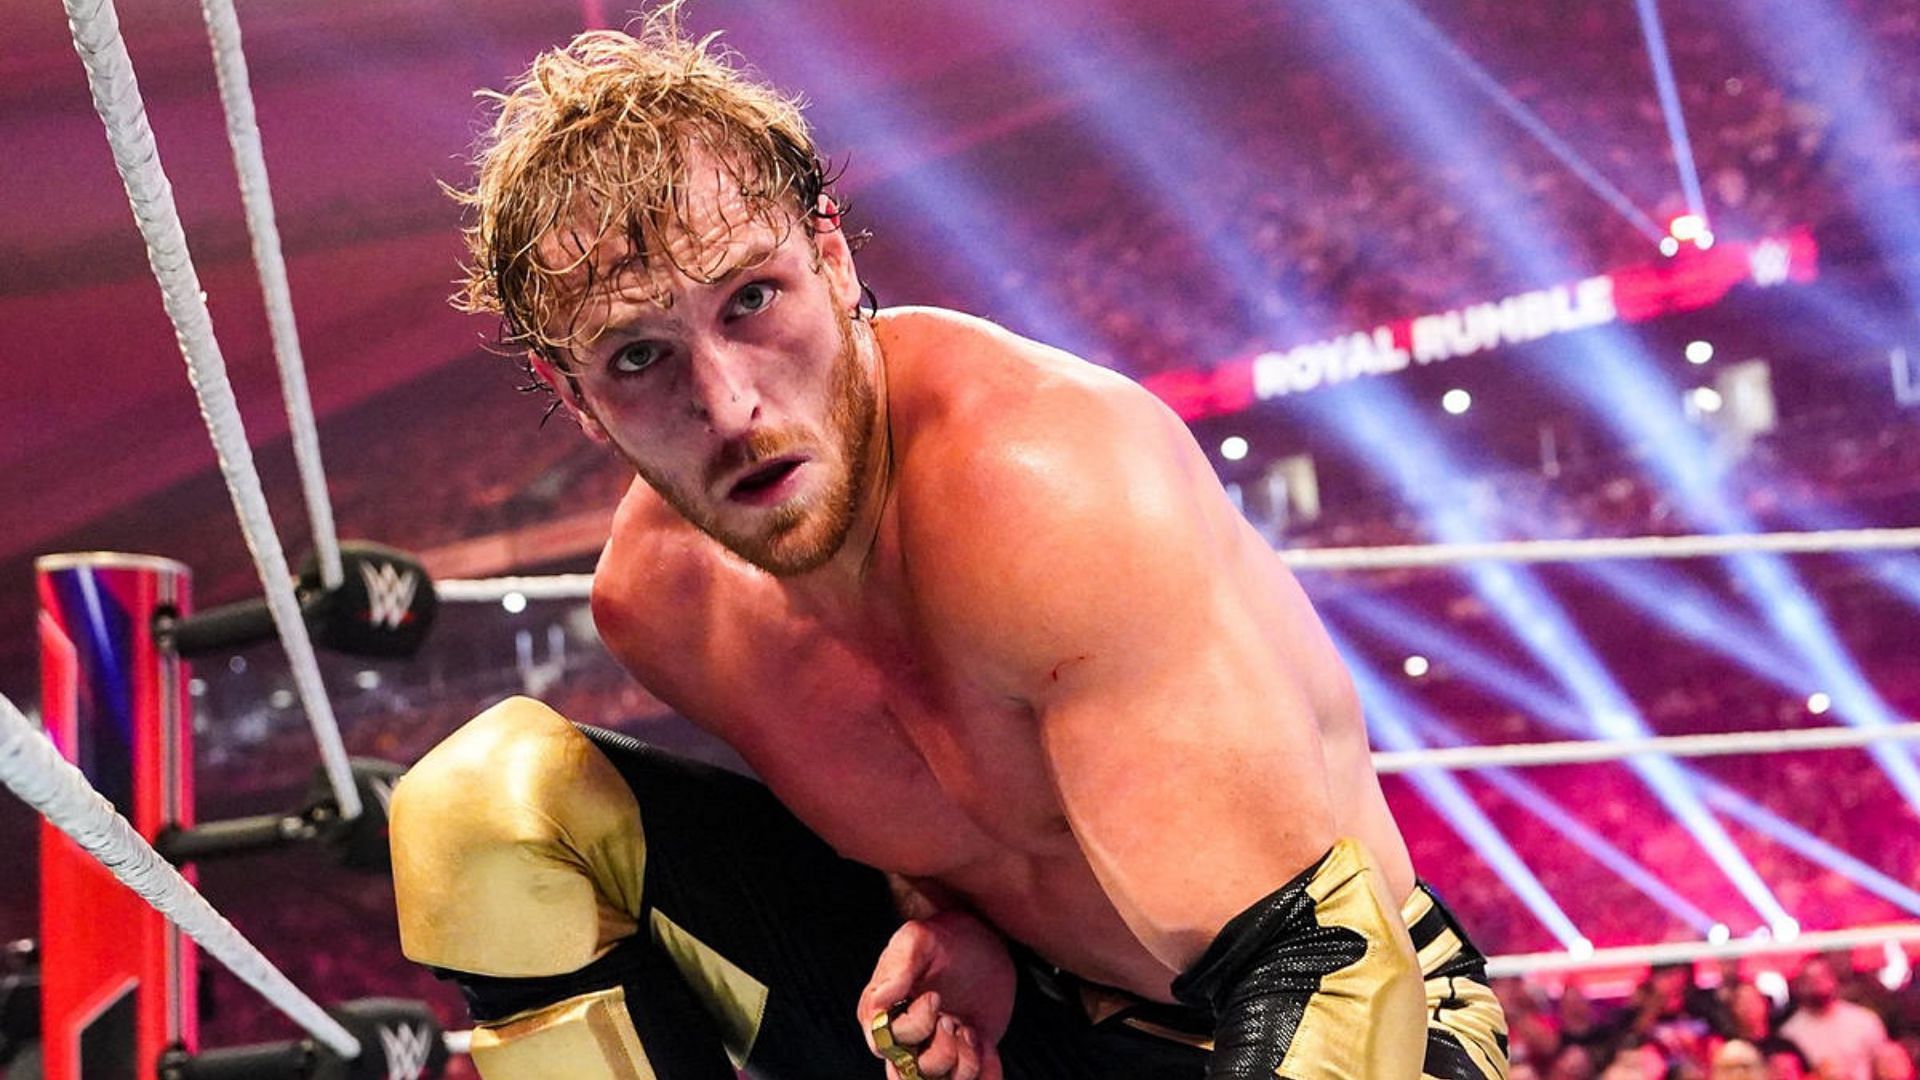 Logan Paul is in for a tough match this week on SmackDown